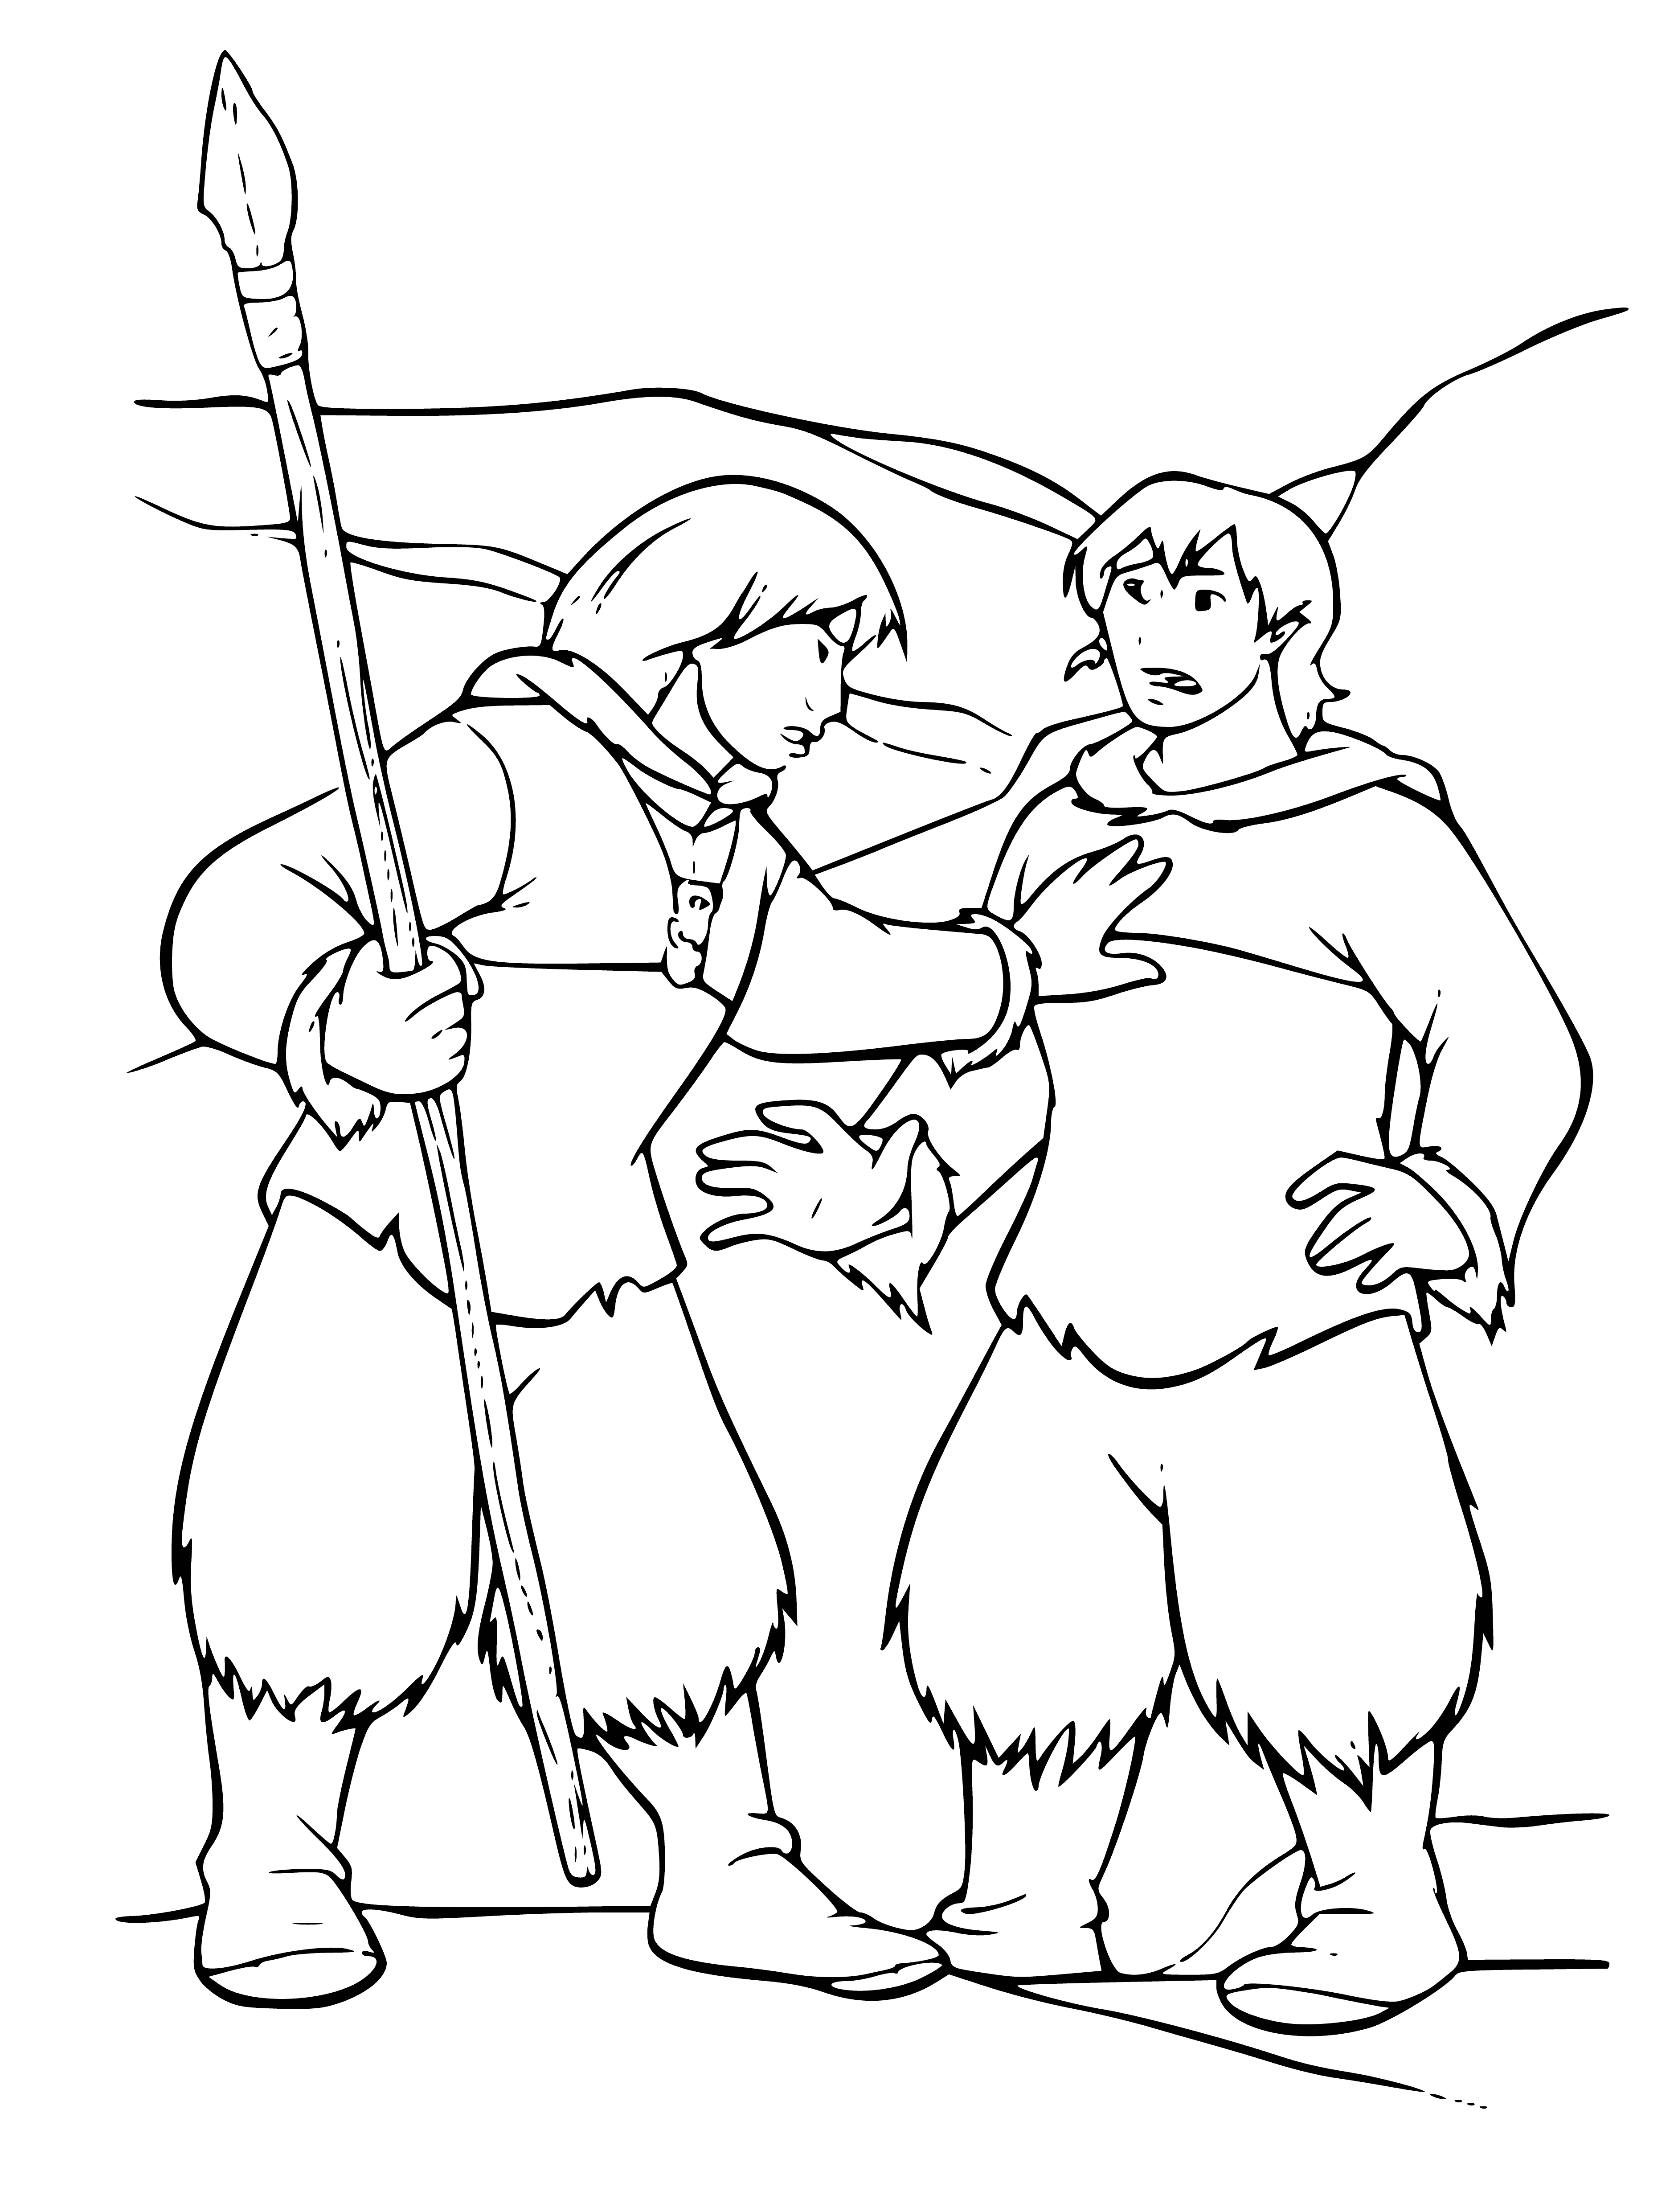 coloring page: Brother & sister arguing, sister trying to calm brother down. #siblings #family